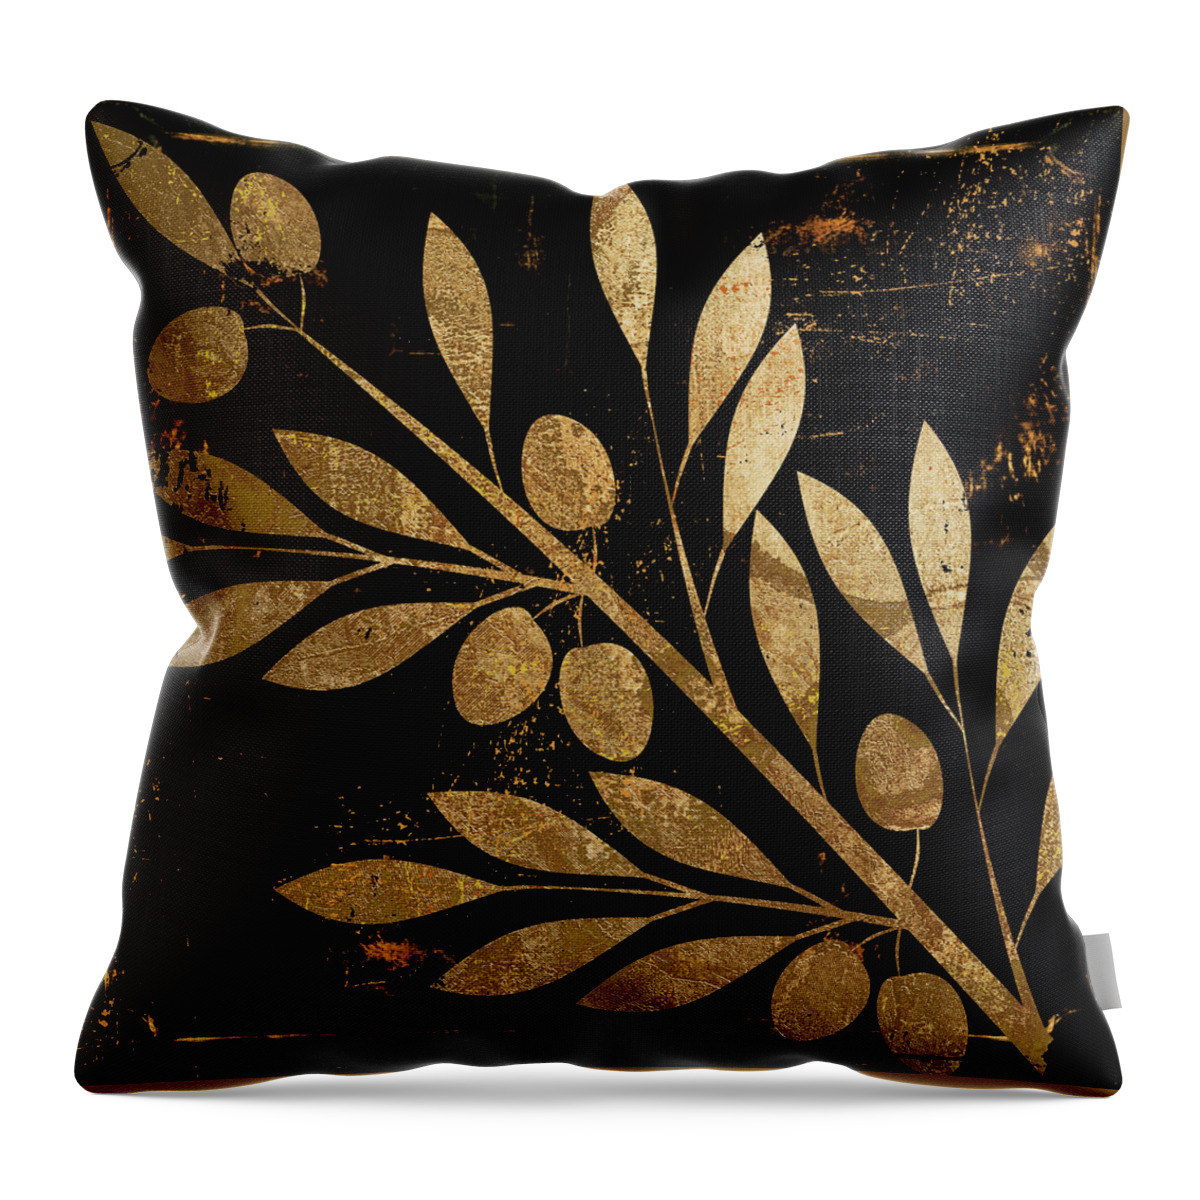 Gold And Black Throw Pillow featuring the painting Bellissima by Mindy Sommers